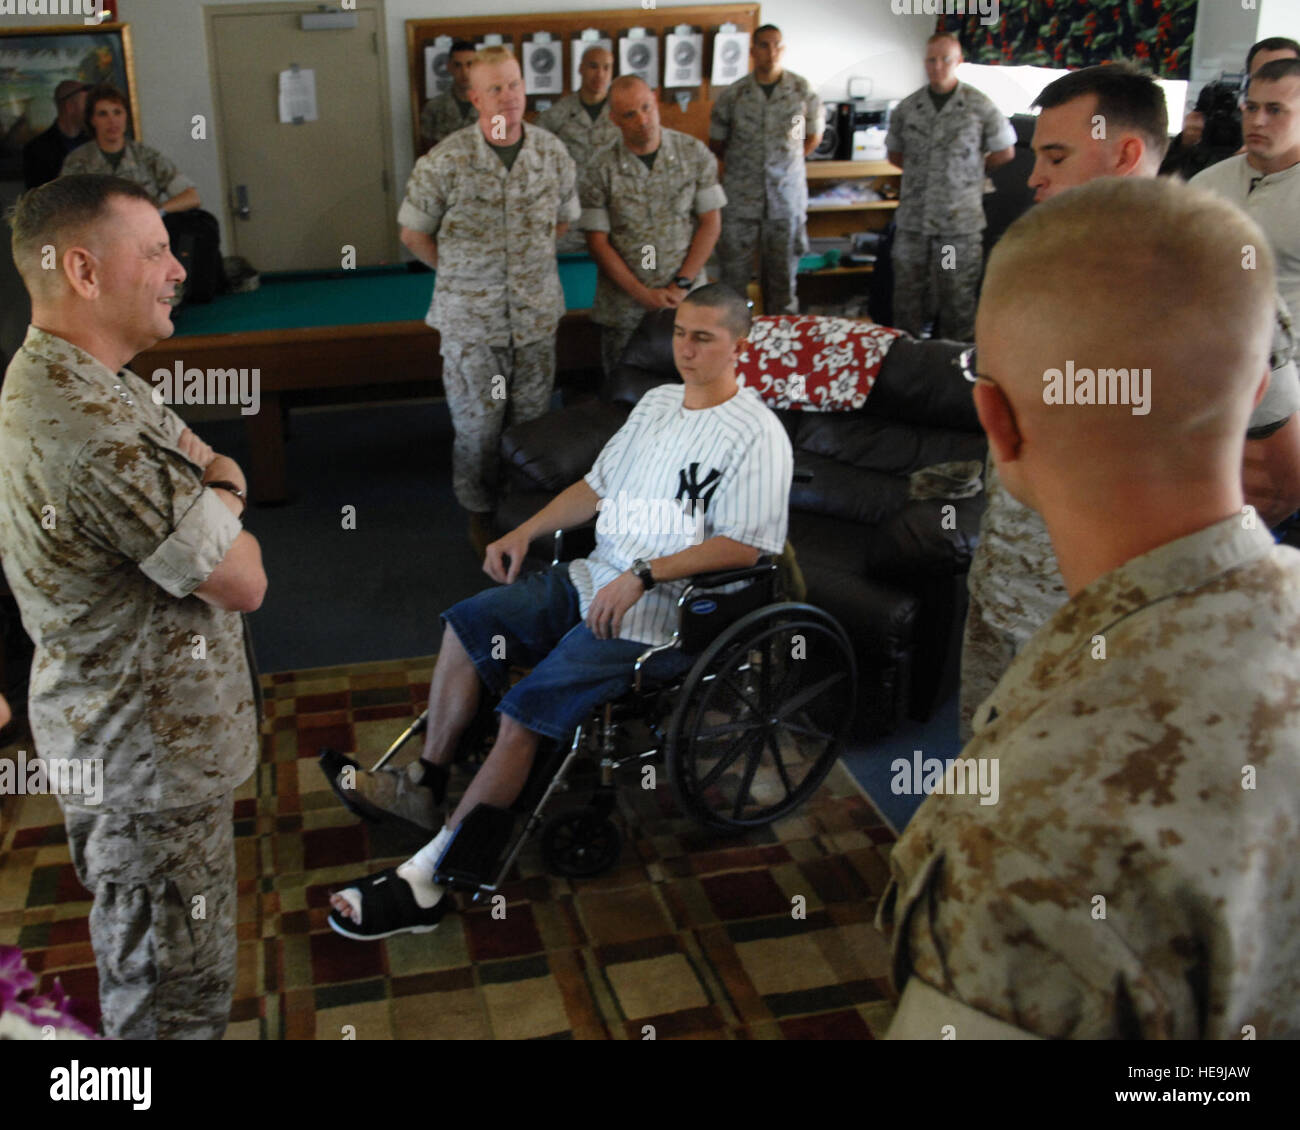 Marine Gen. James E. Cartwright, vice chairman of the Joint Chiefs of Staff, meets with wounded warriors at their barracks at Marine Corps Air Station Kaneohe, Hawaii, April 21, 2008. Cartwright met with wounded warriors to check on their care.  Air Force Tech. Sgt. Adam M. Stump. (Released) Stock Photo